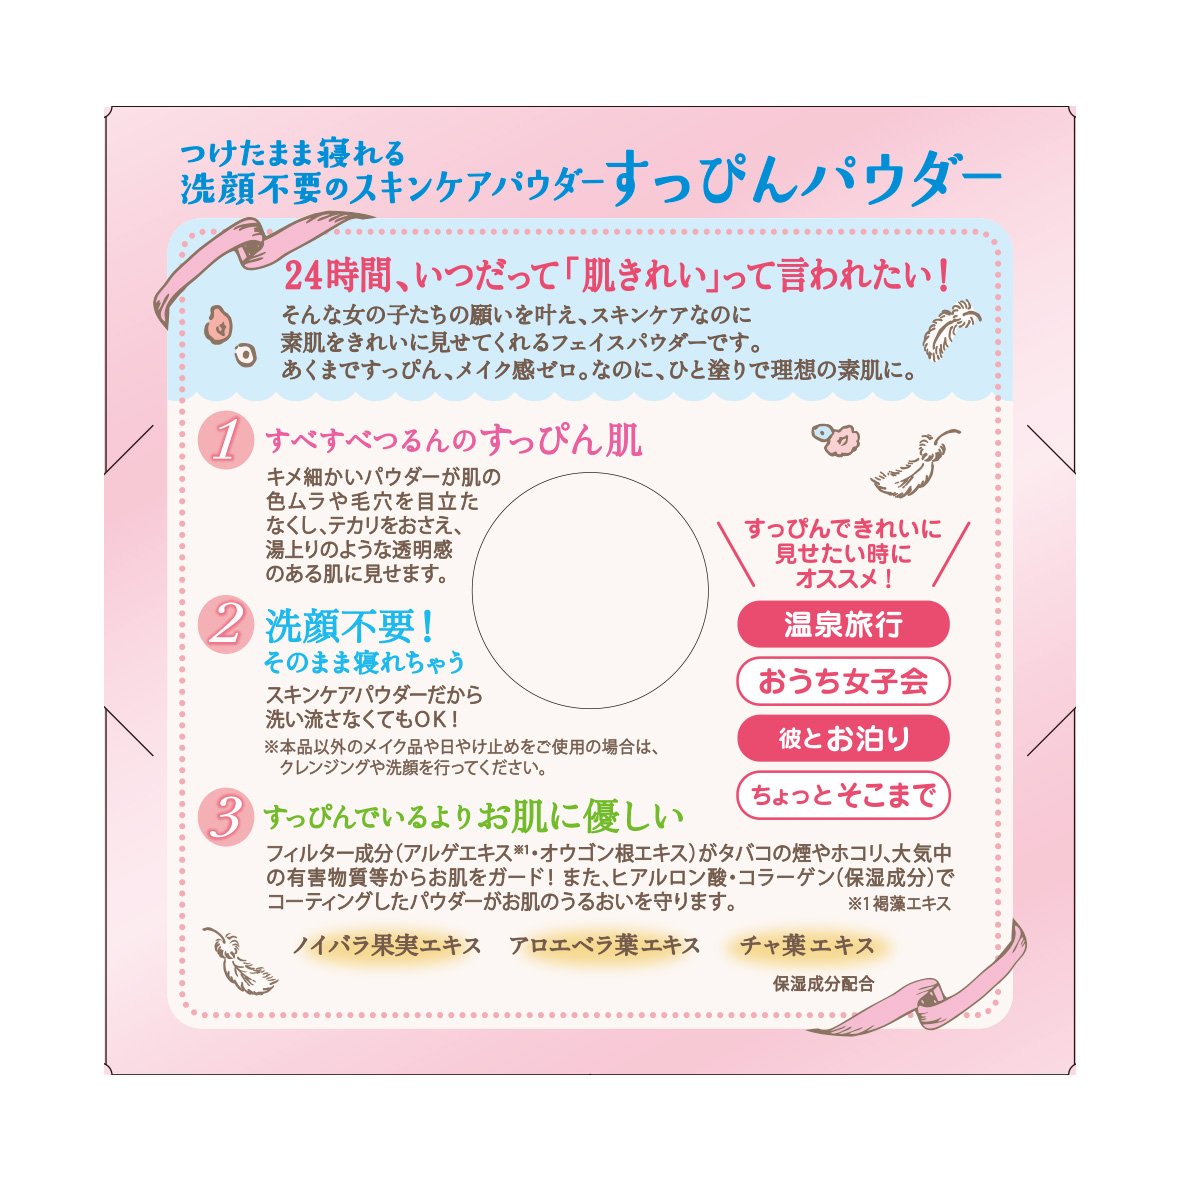  Club Cosmetics Suppin Face Powder from Japan, Pastel Rose